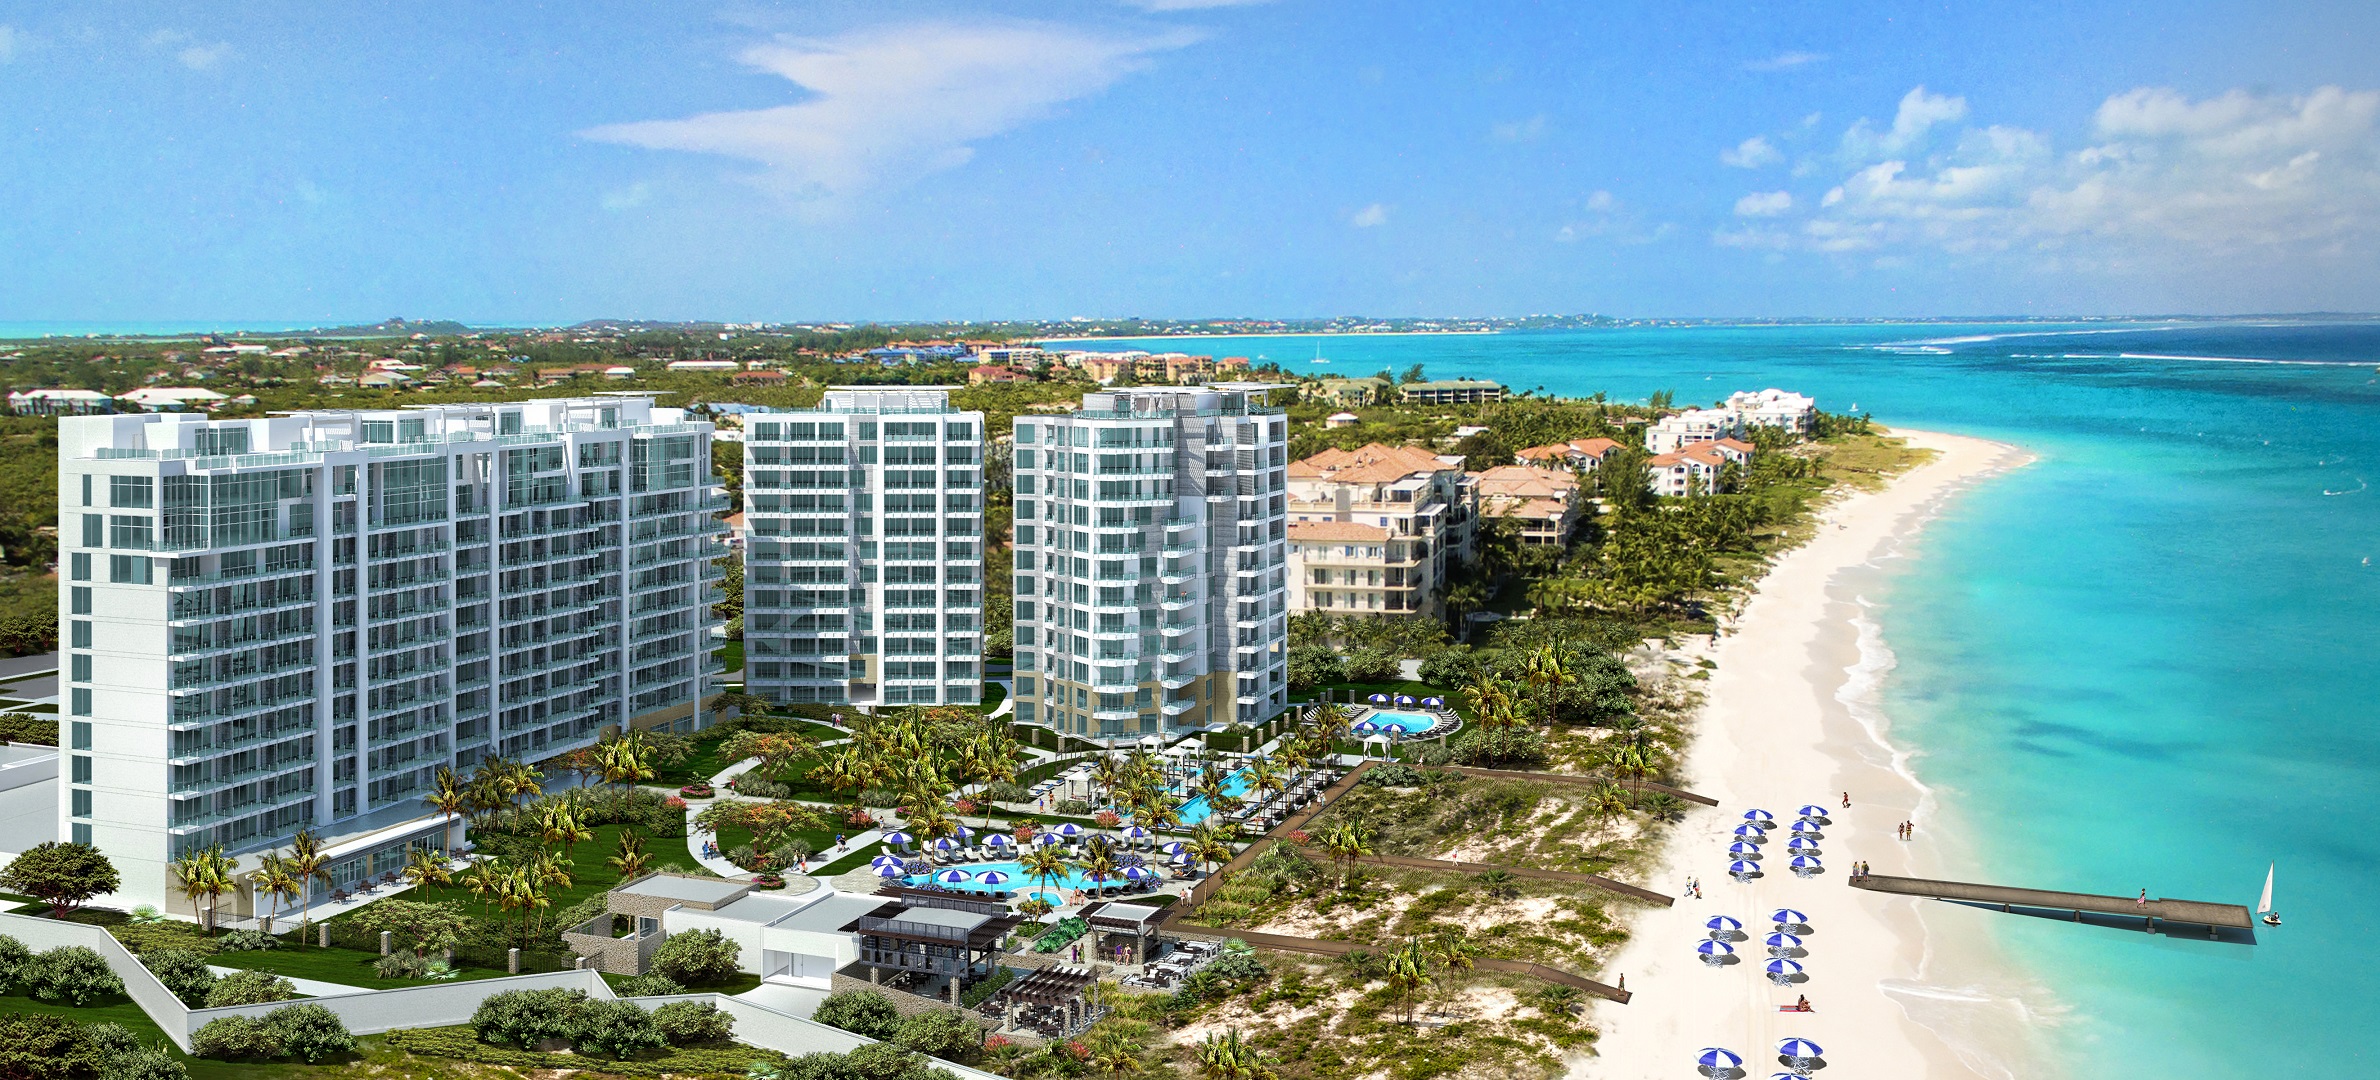 An aerial view of the new RItz-Carlton Turks & Caicos resort on Grace Bay beach.